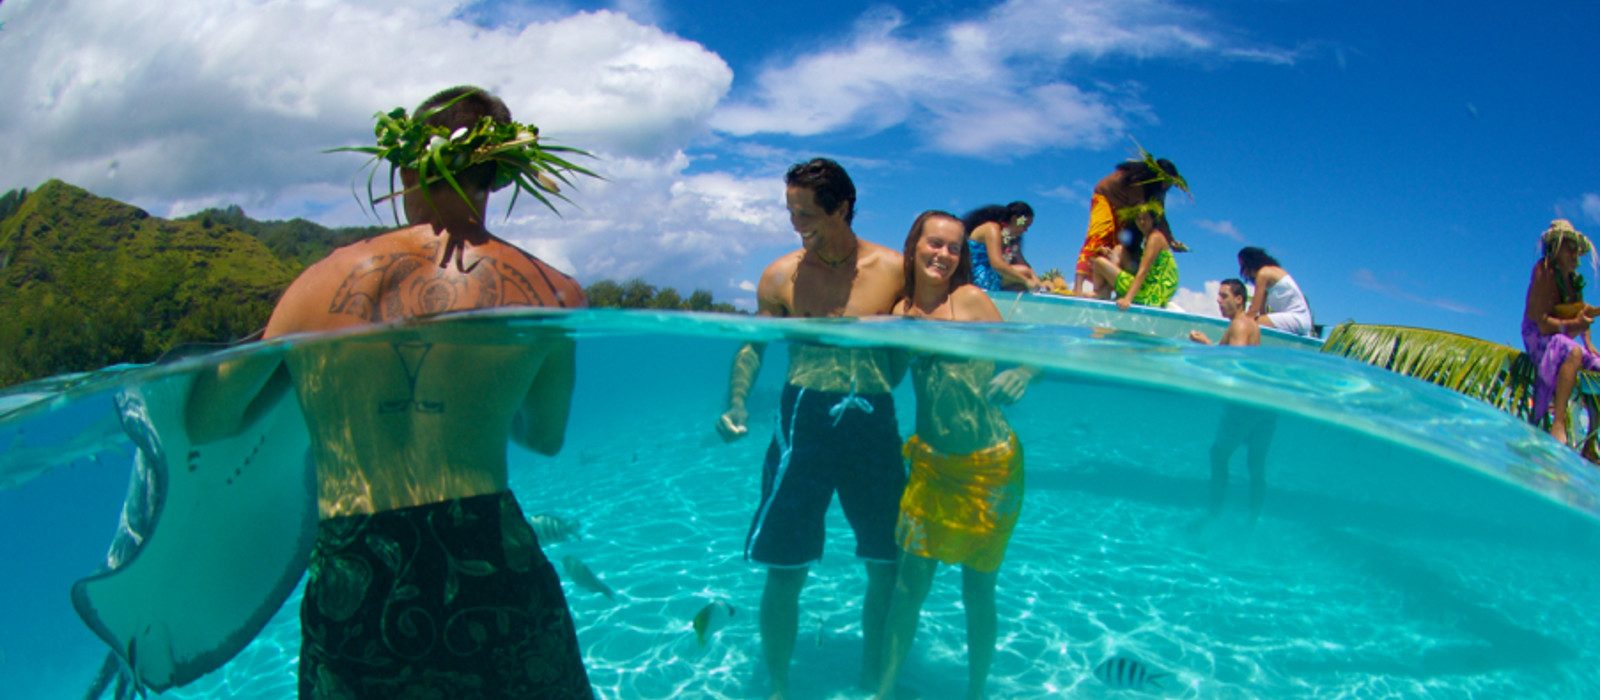 book online your tours and romnatic activities in French Polynesia